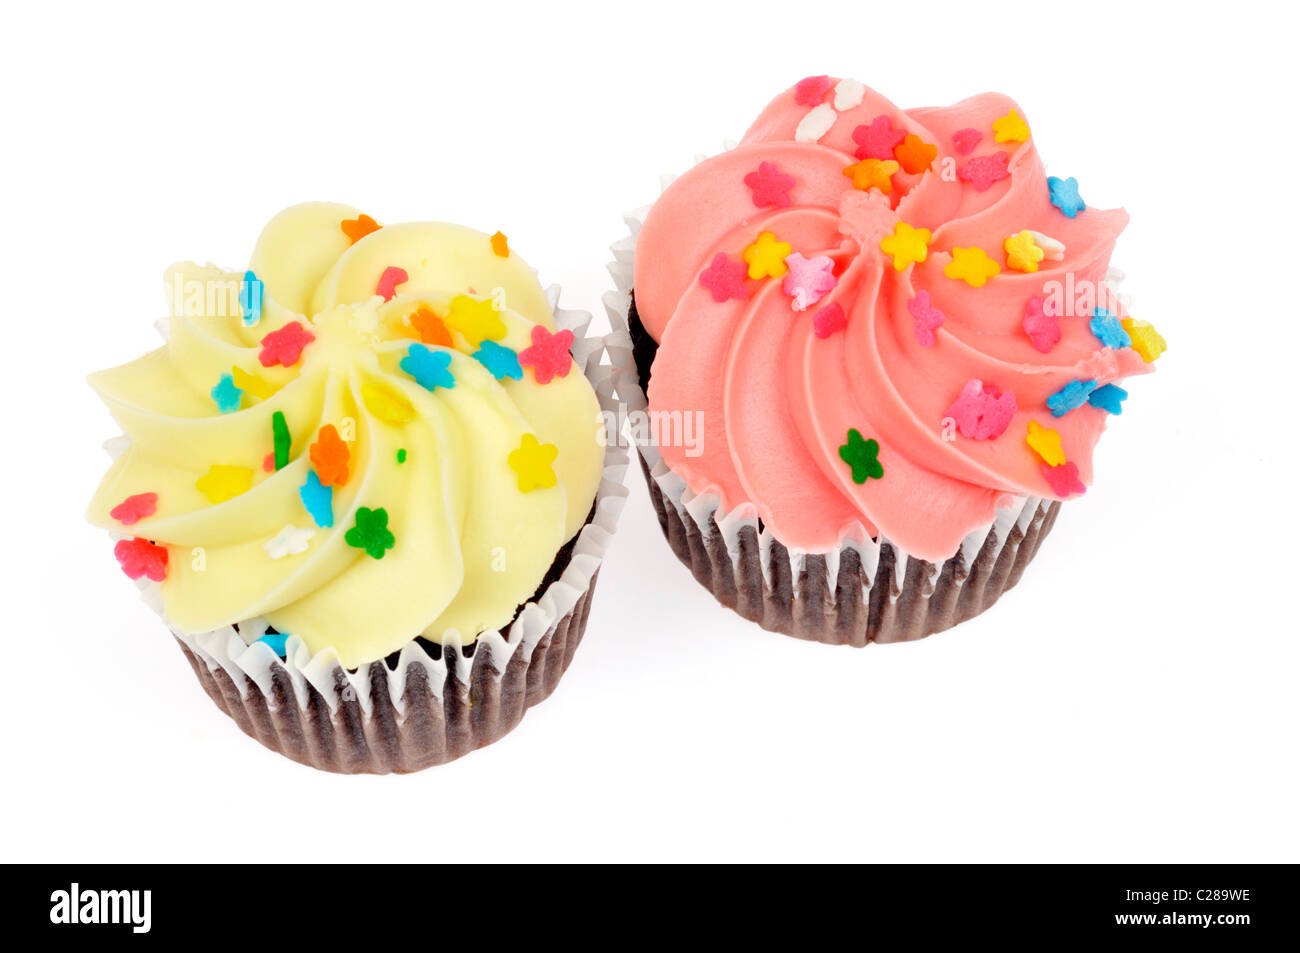 Yellow lemon and pink  berry iced chocolate cupcakes decorated with sprinkles on white background isolated. Stock Photo